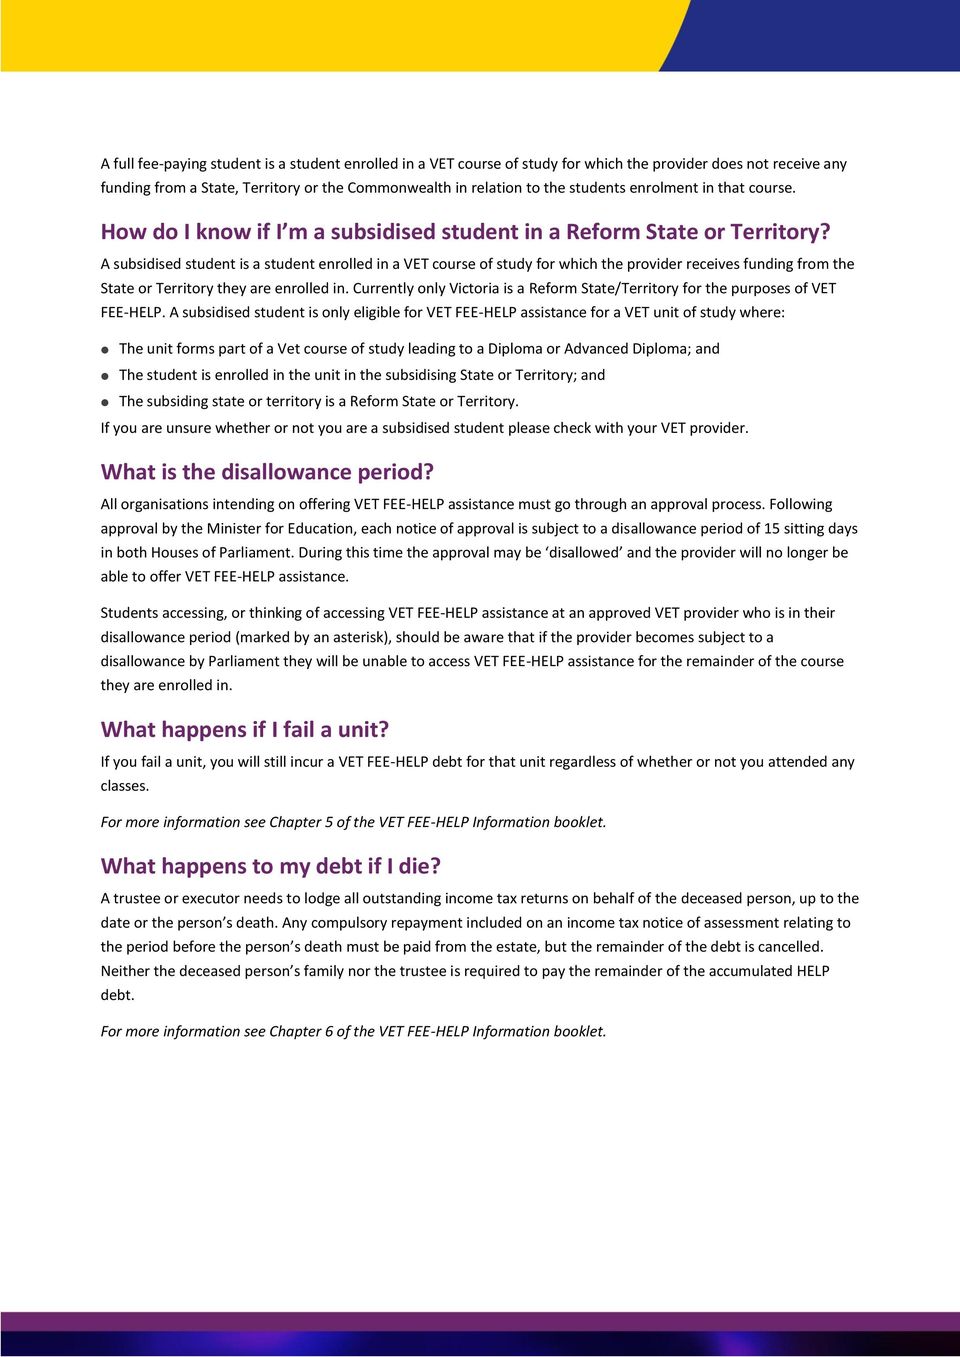 A subsidised student is a student enrolled in a VET course of study for which the provider receives funding from the State or Territory they are enrolled in.